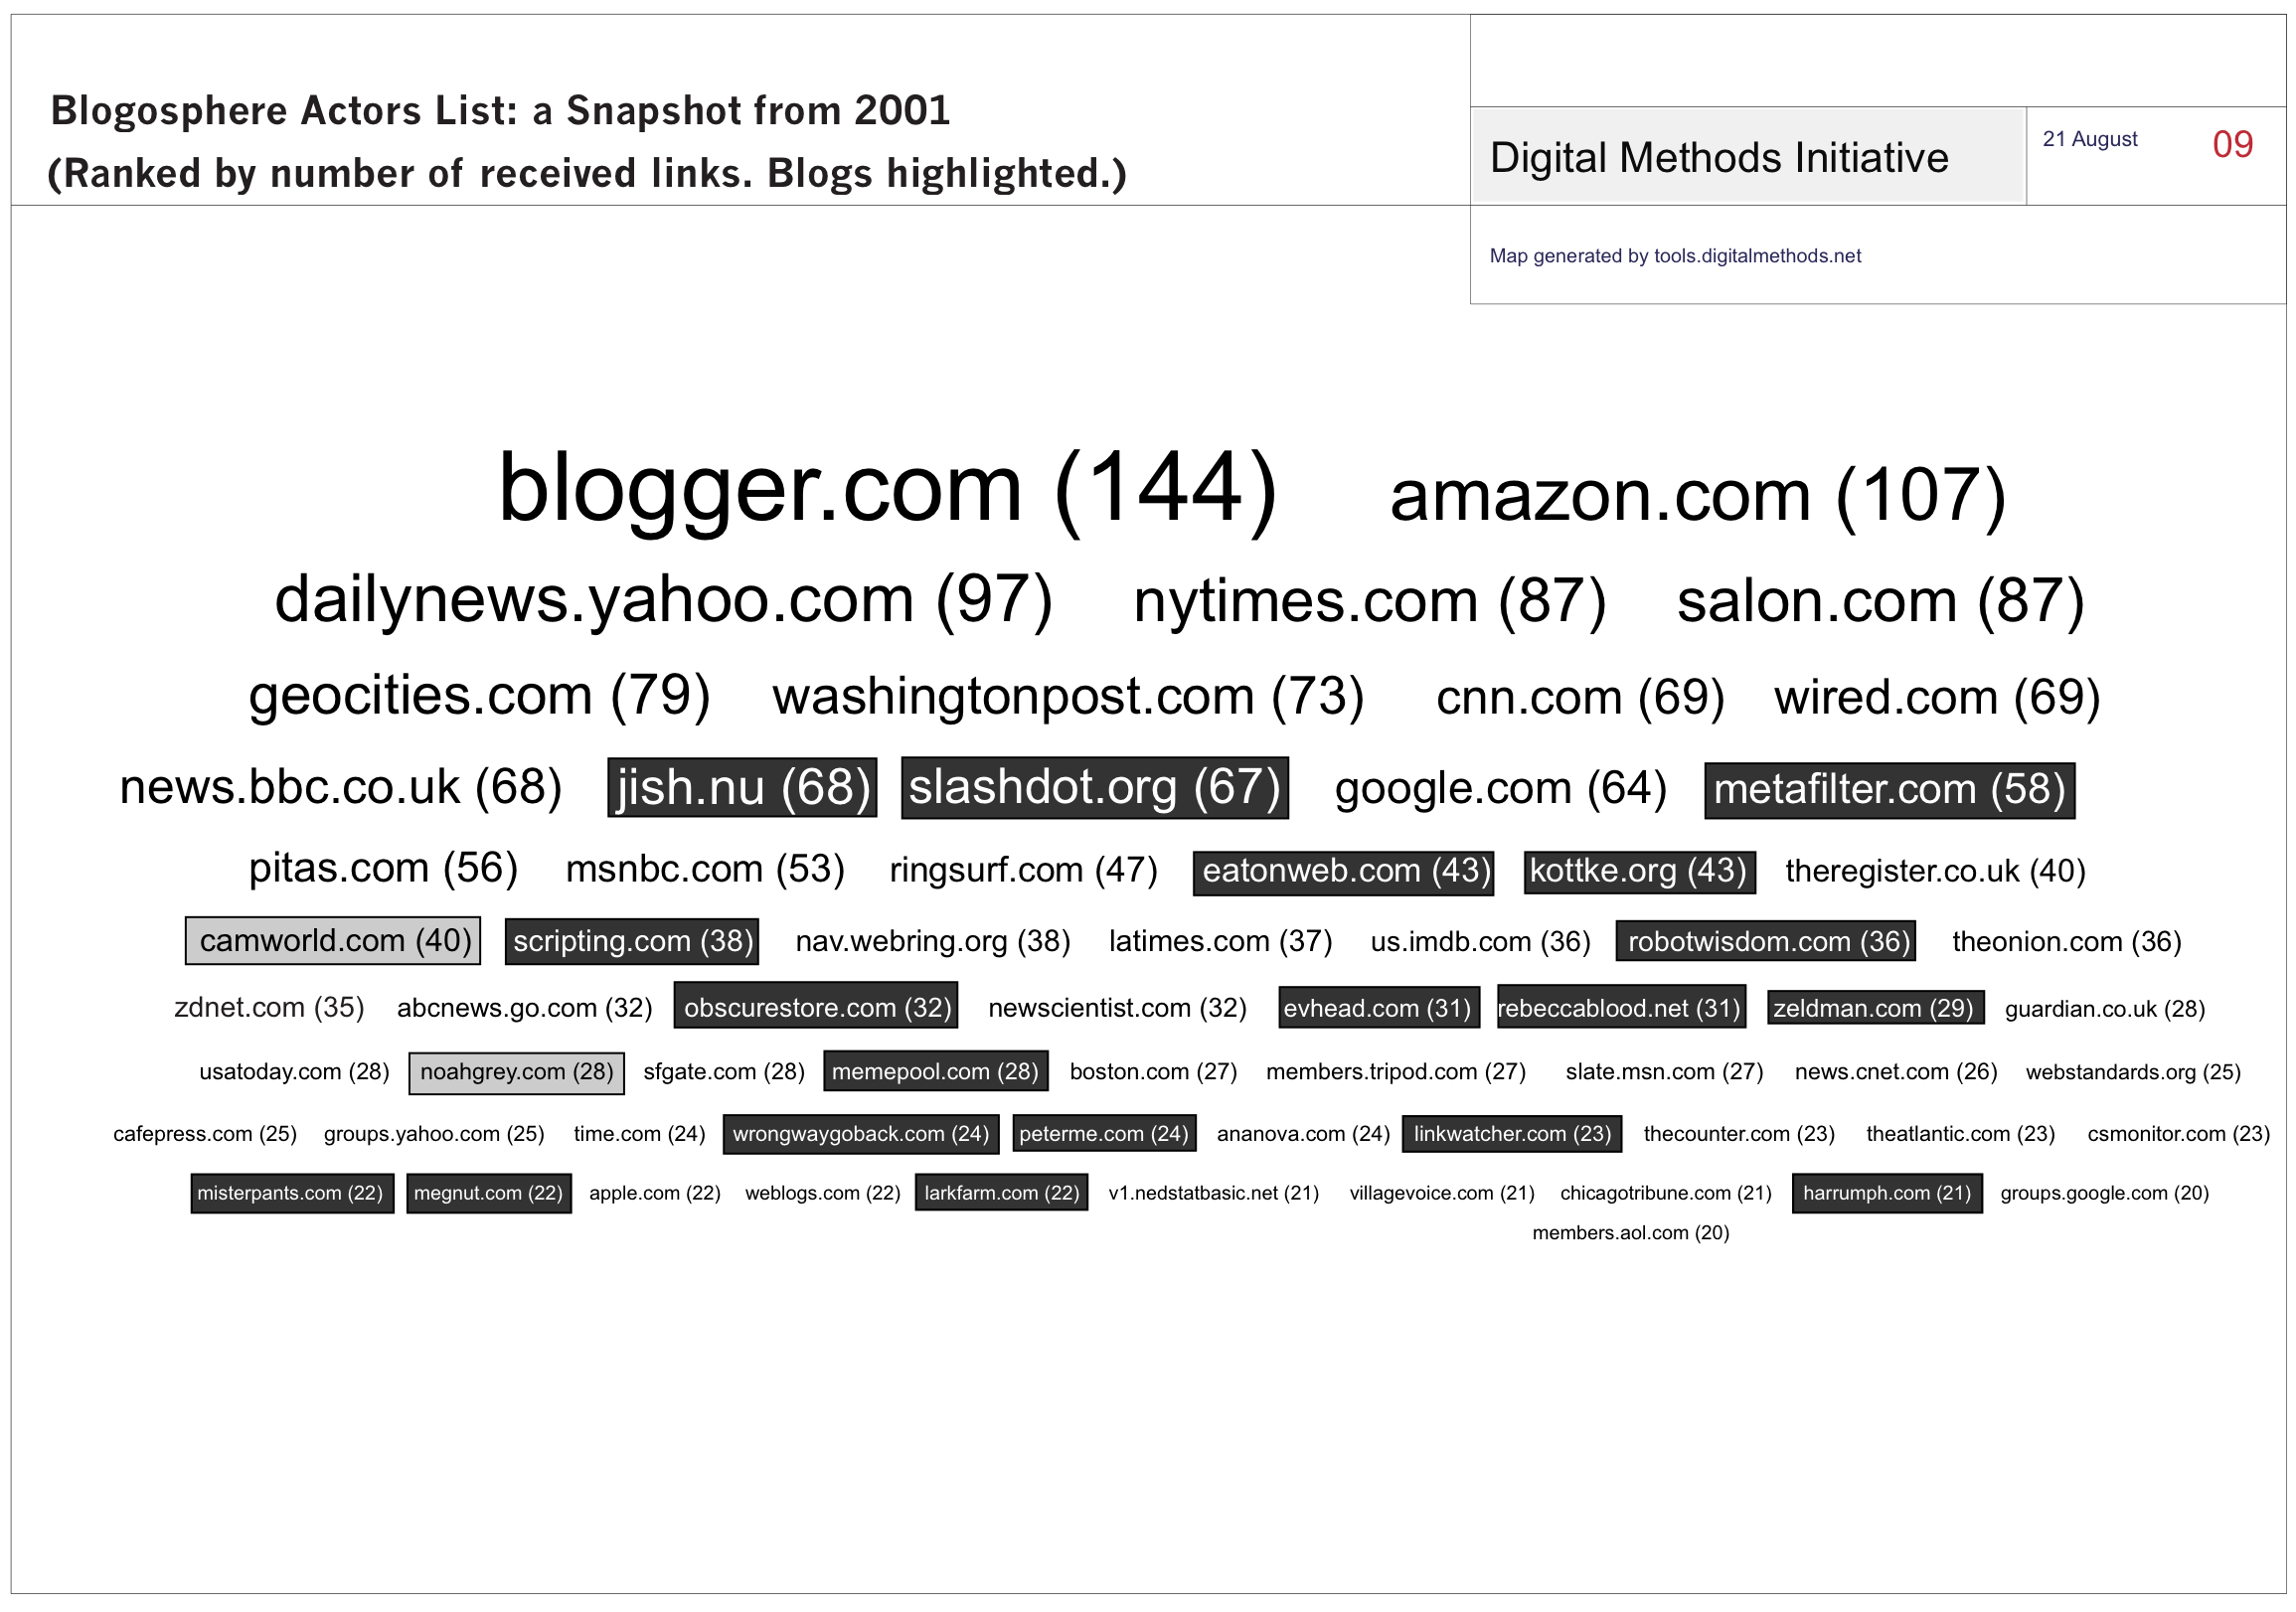 Blogosphere_Actors_List__a_Snapshot_from_2001v1.png